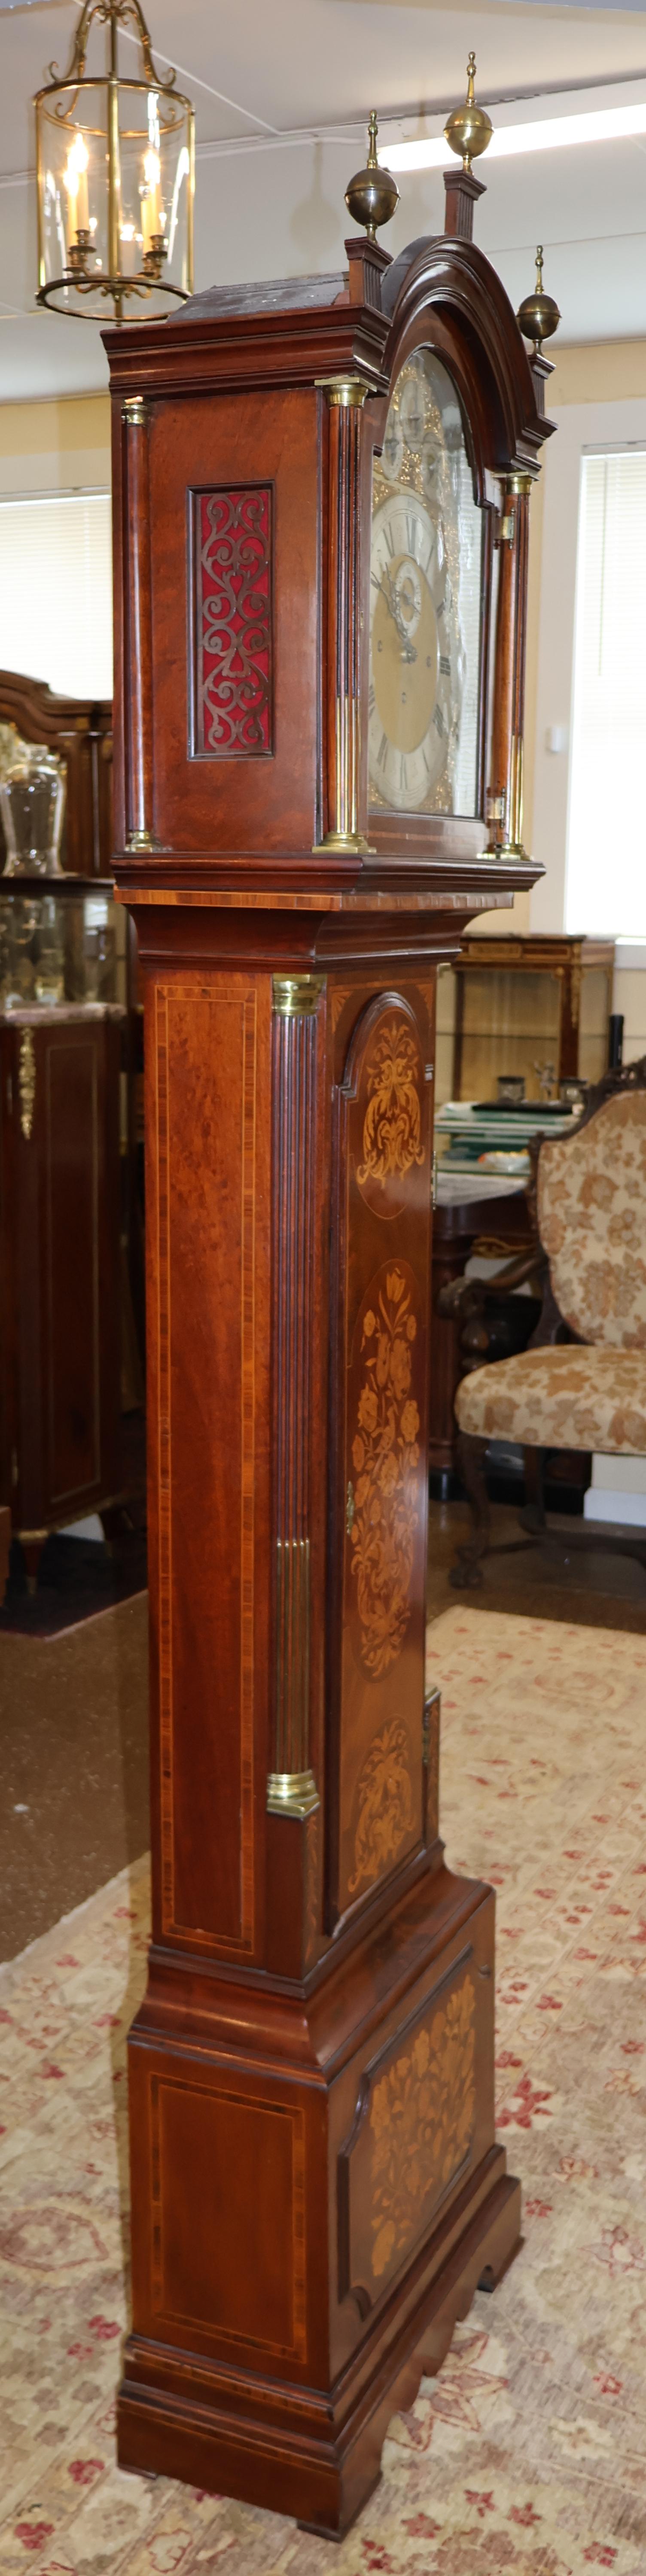 Herbert Blockley London Musical 19th Century Inlaid Tall Case Grandfather Clock In Good Condition For Sale In Long Branch, NJ